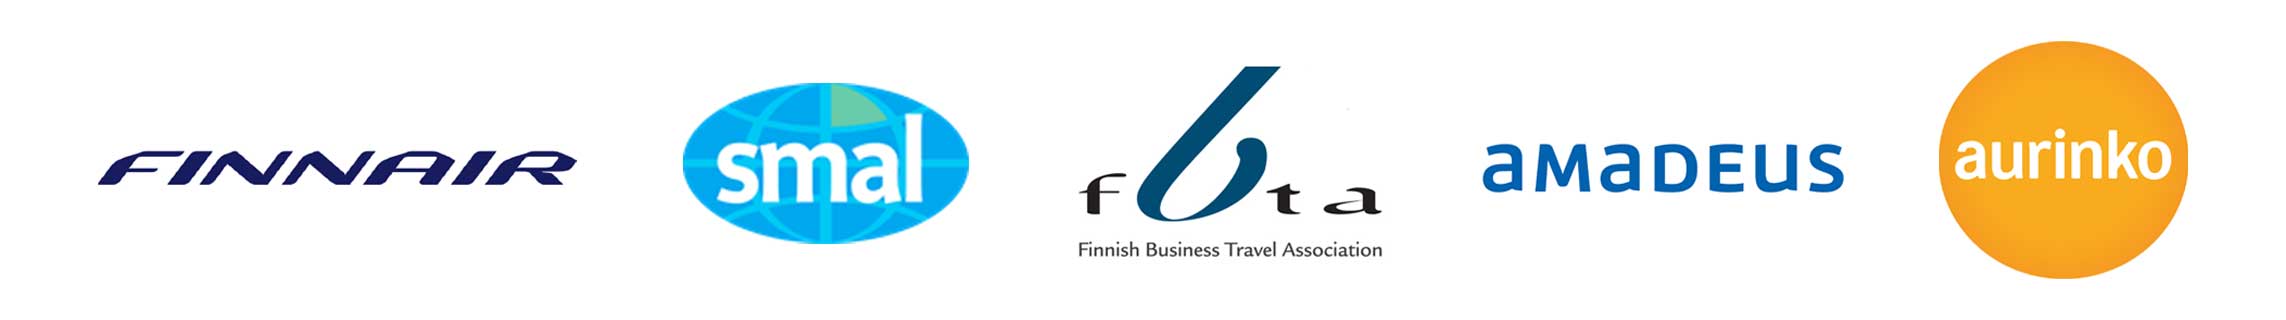 Perho Culinary, Tourism & Business College's partners in education: Finnair, SMAL, FBTA, Amadeus Finland and Aurinkomatkat